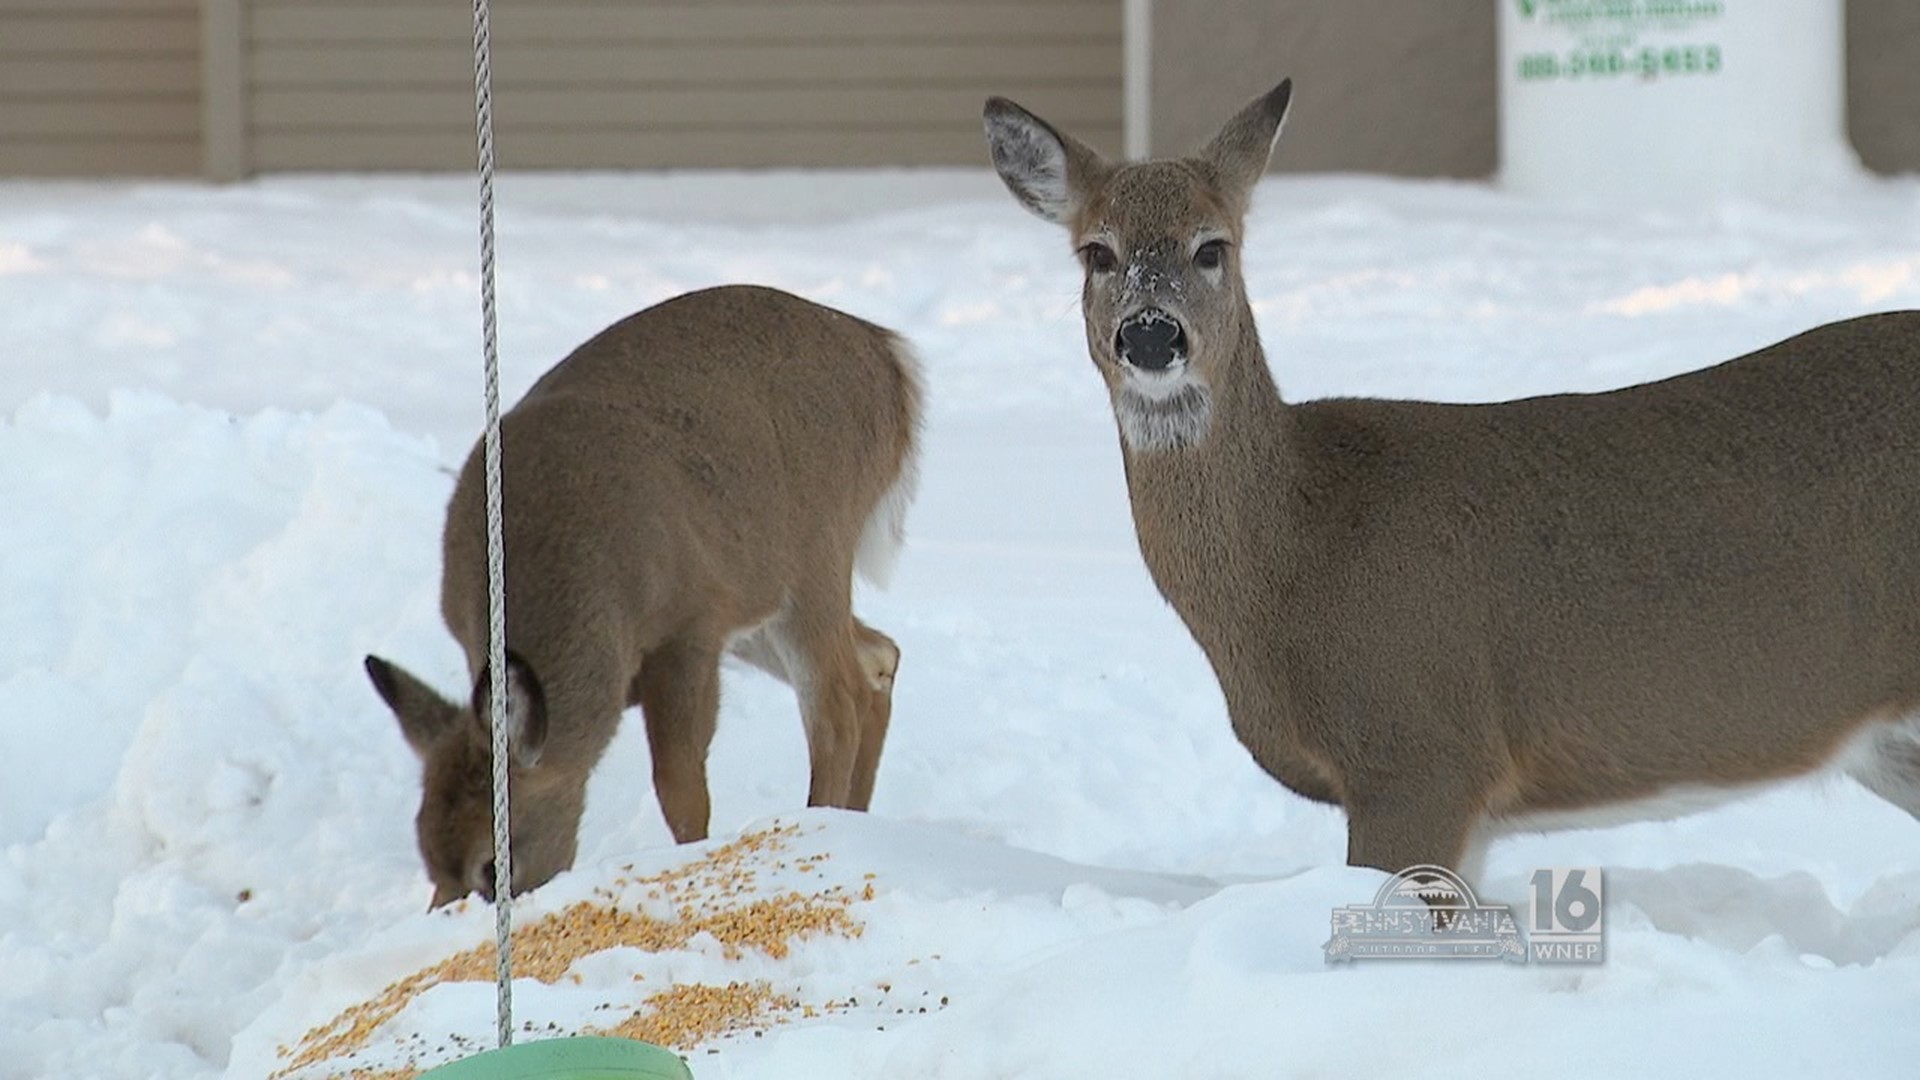 Feeding deer in the winter can cause more harm than good.